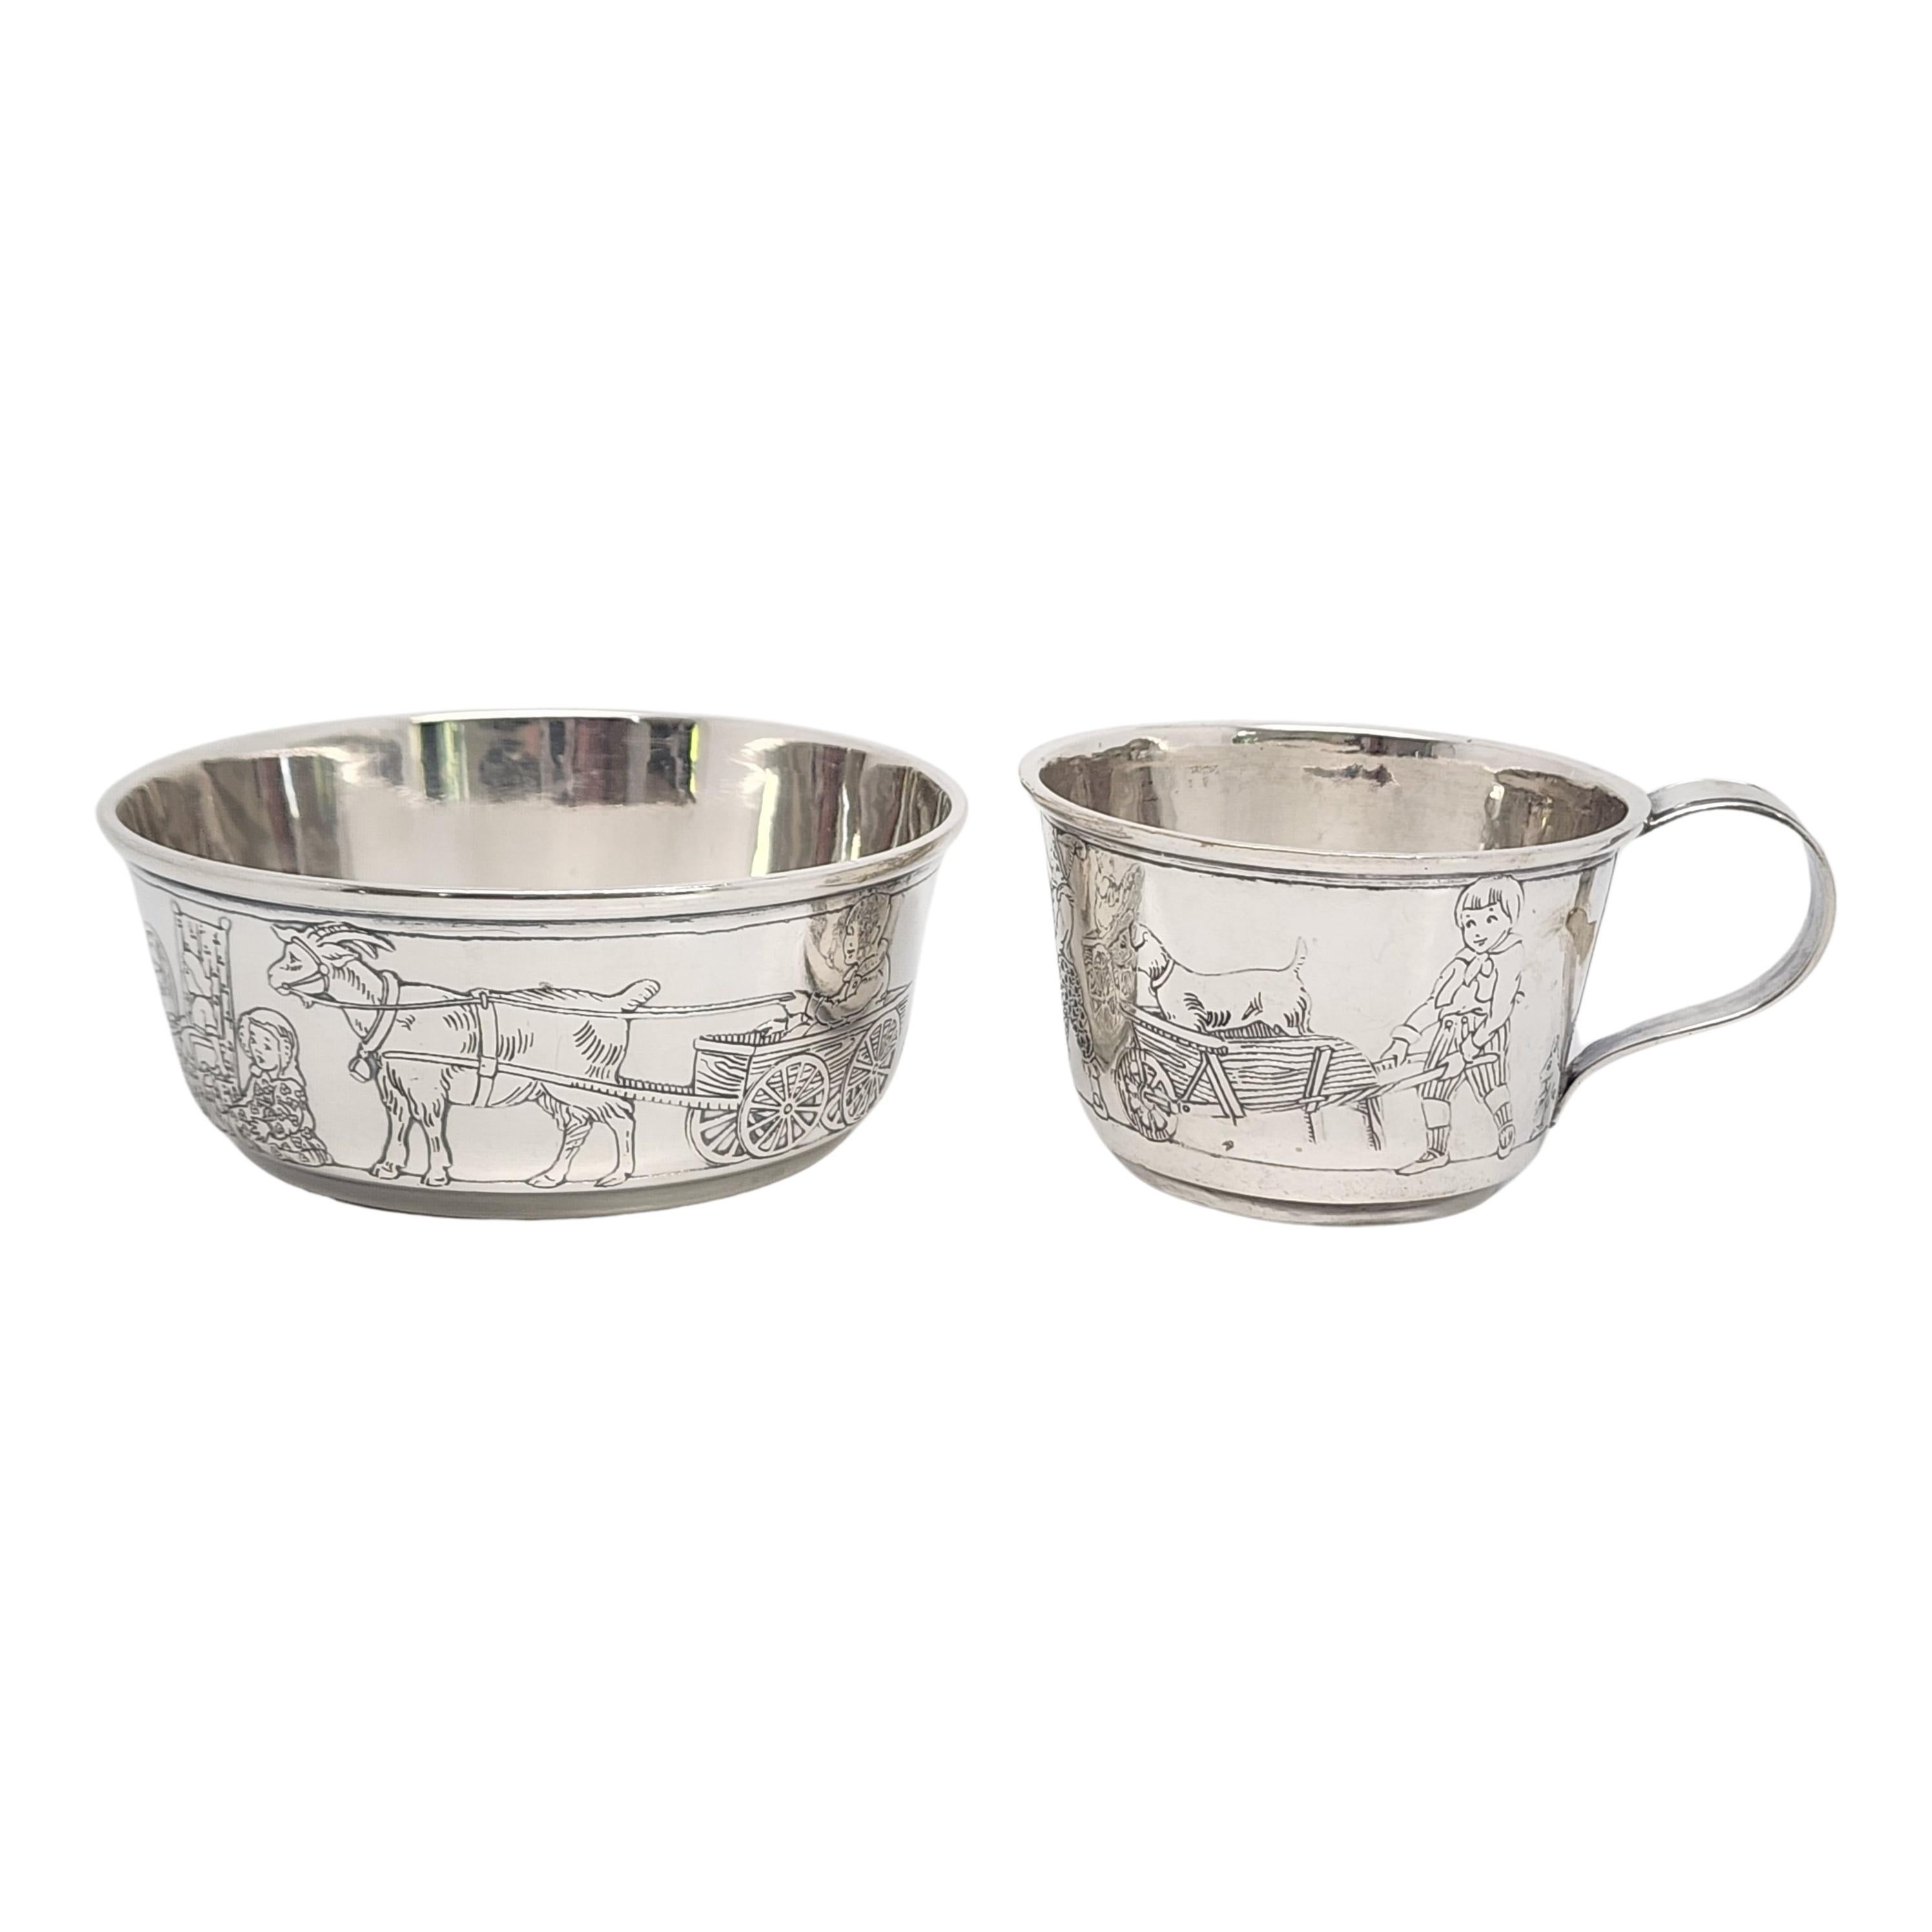 Sterling silver child's bowl and cup by R. Blackinton & Co, with monogram.

Monogram appears to be RWS on both pieces.

A beautiful etched design with classic, timeless appeal, this child's bowl and cup features classic scenes from childhood.

Bowl